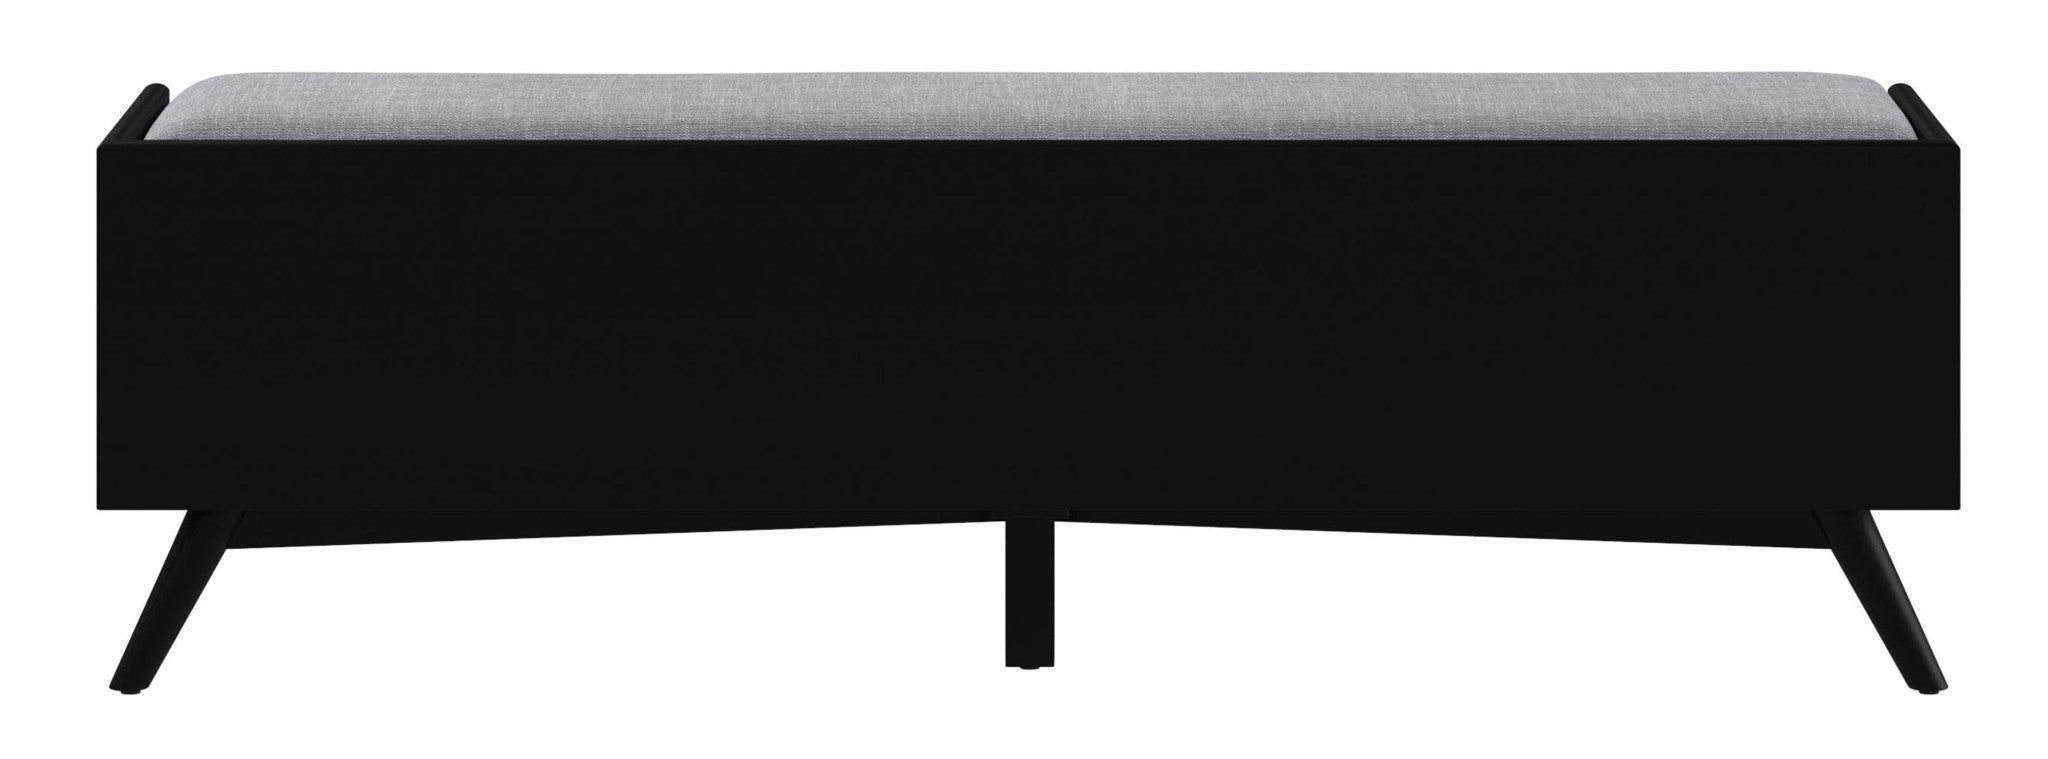 59" Gray and Black Upholstered Polyester Blend Bench with Drawers